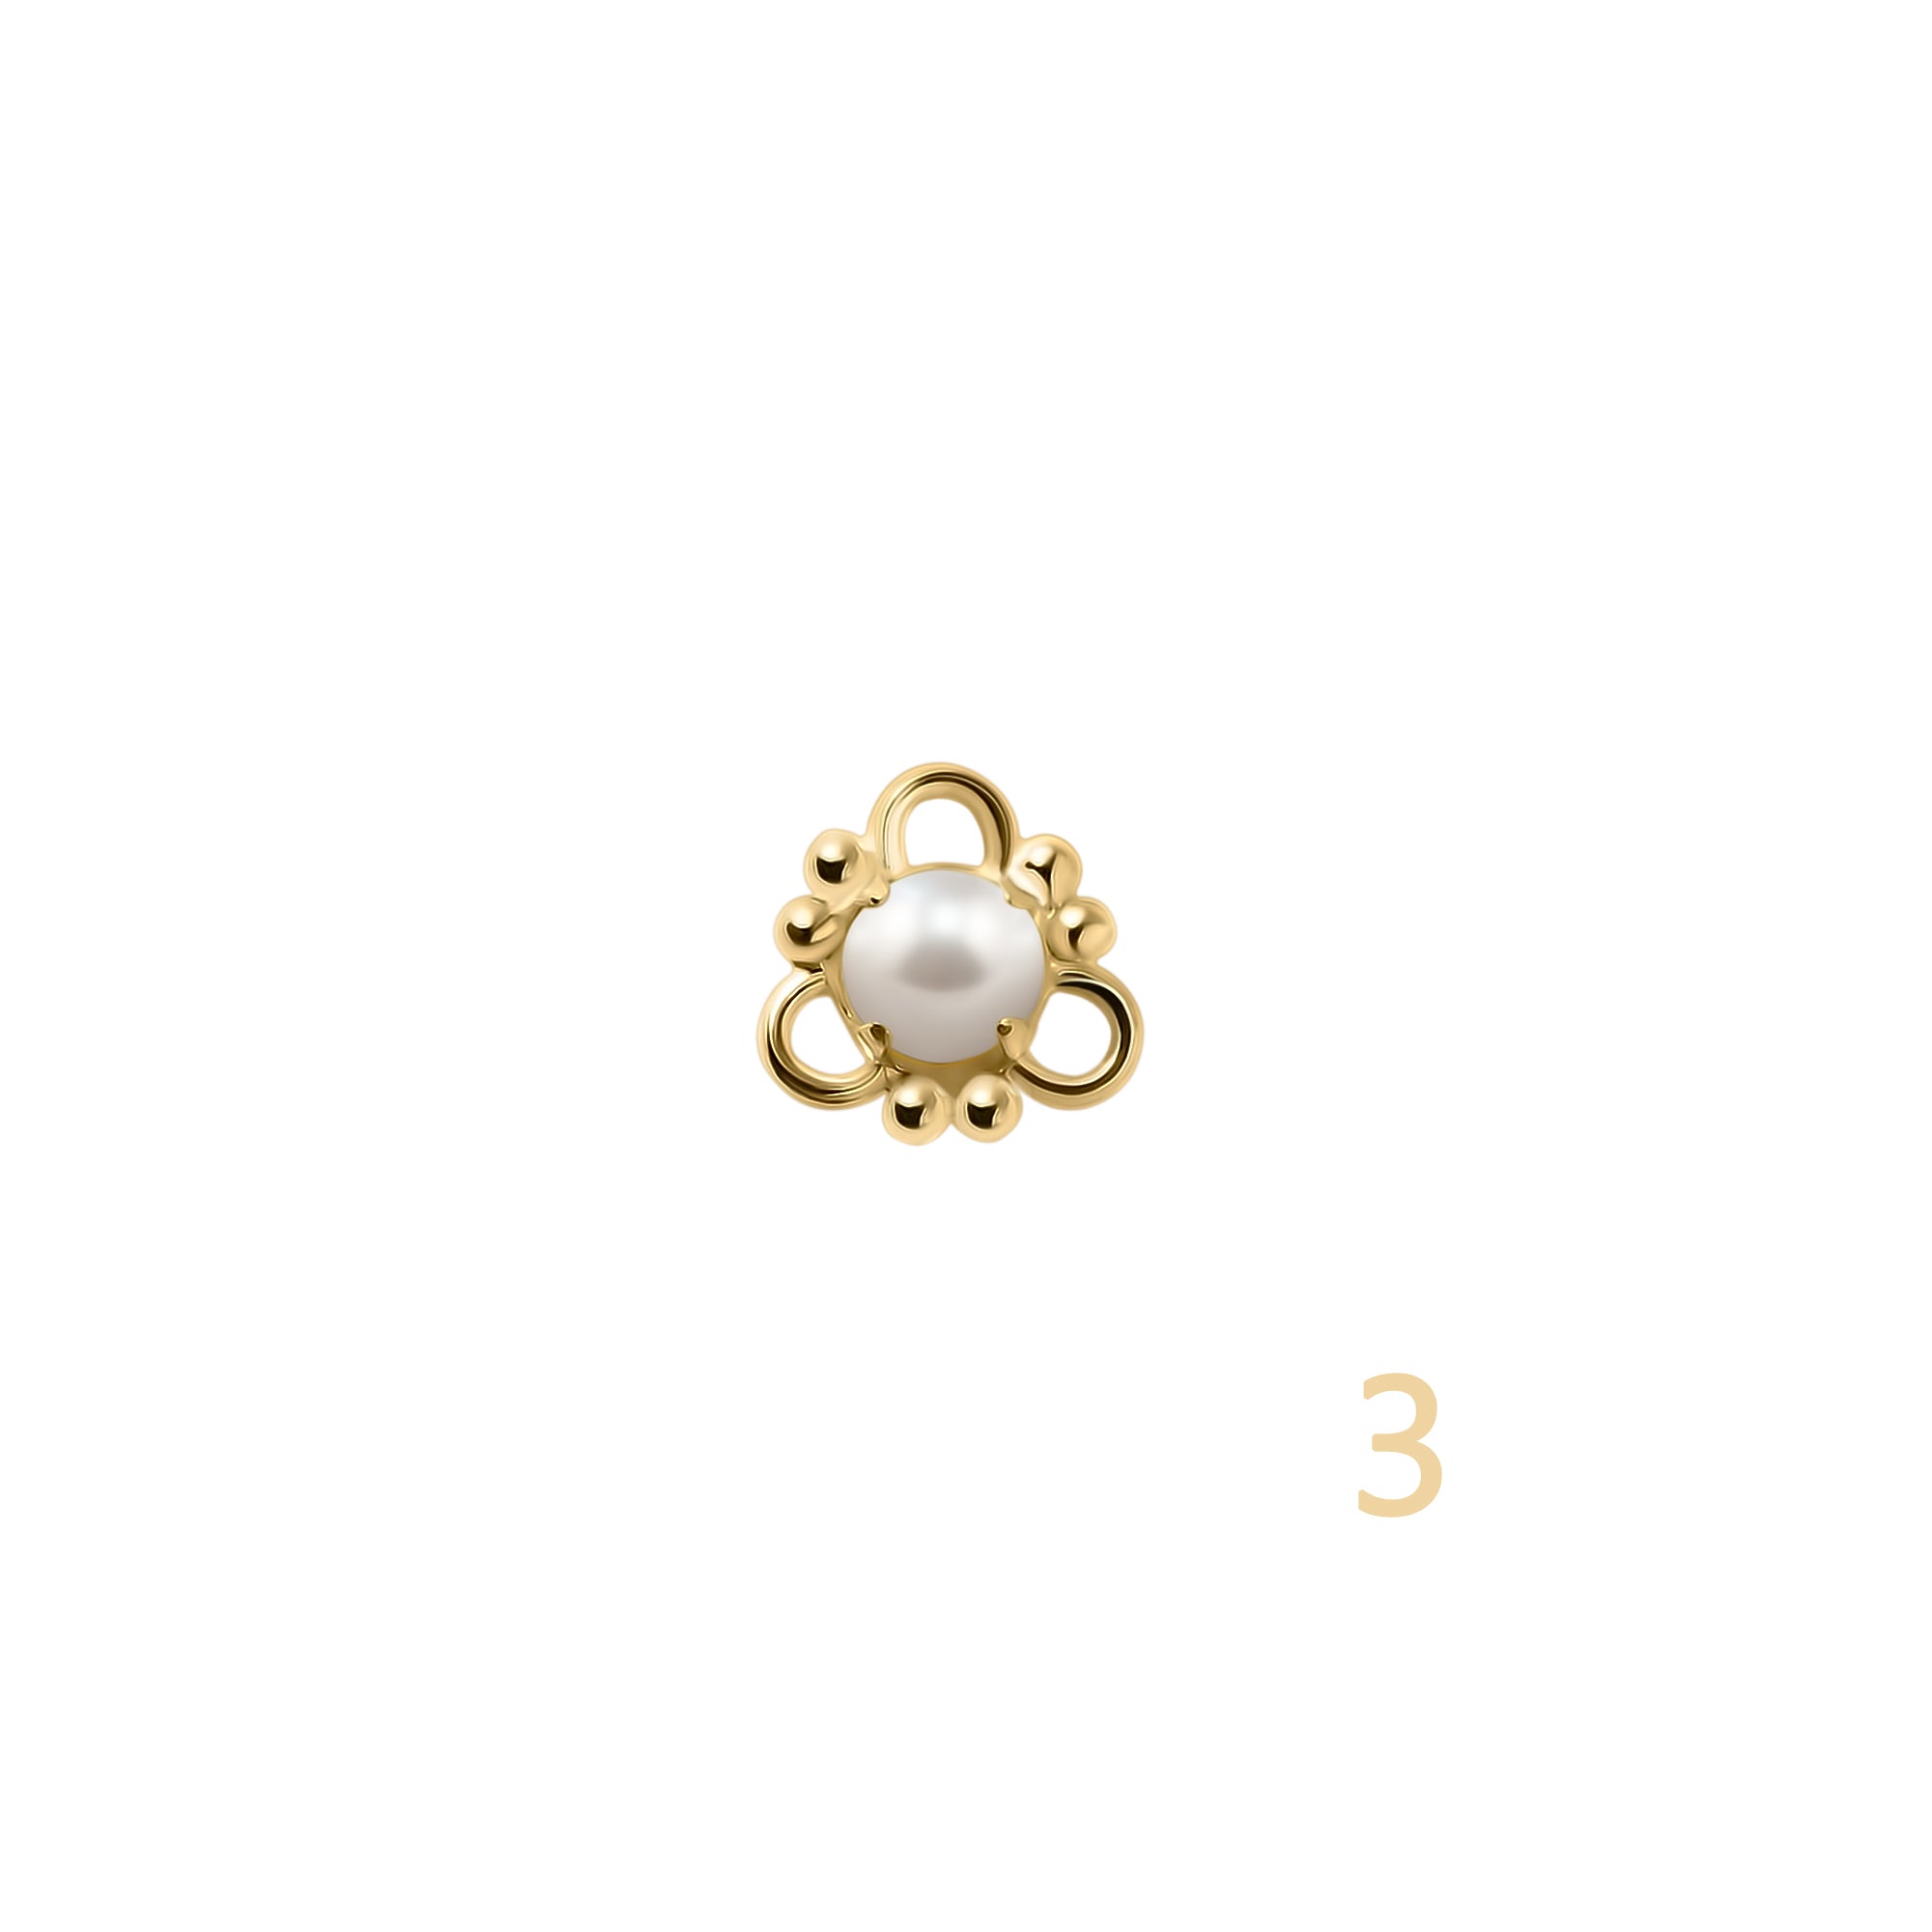 22kt Gold, Pearl Nose Rings Twists